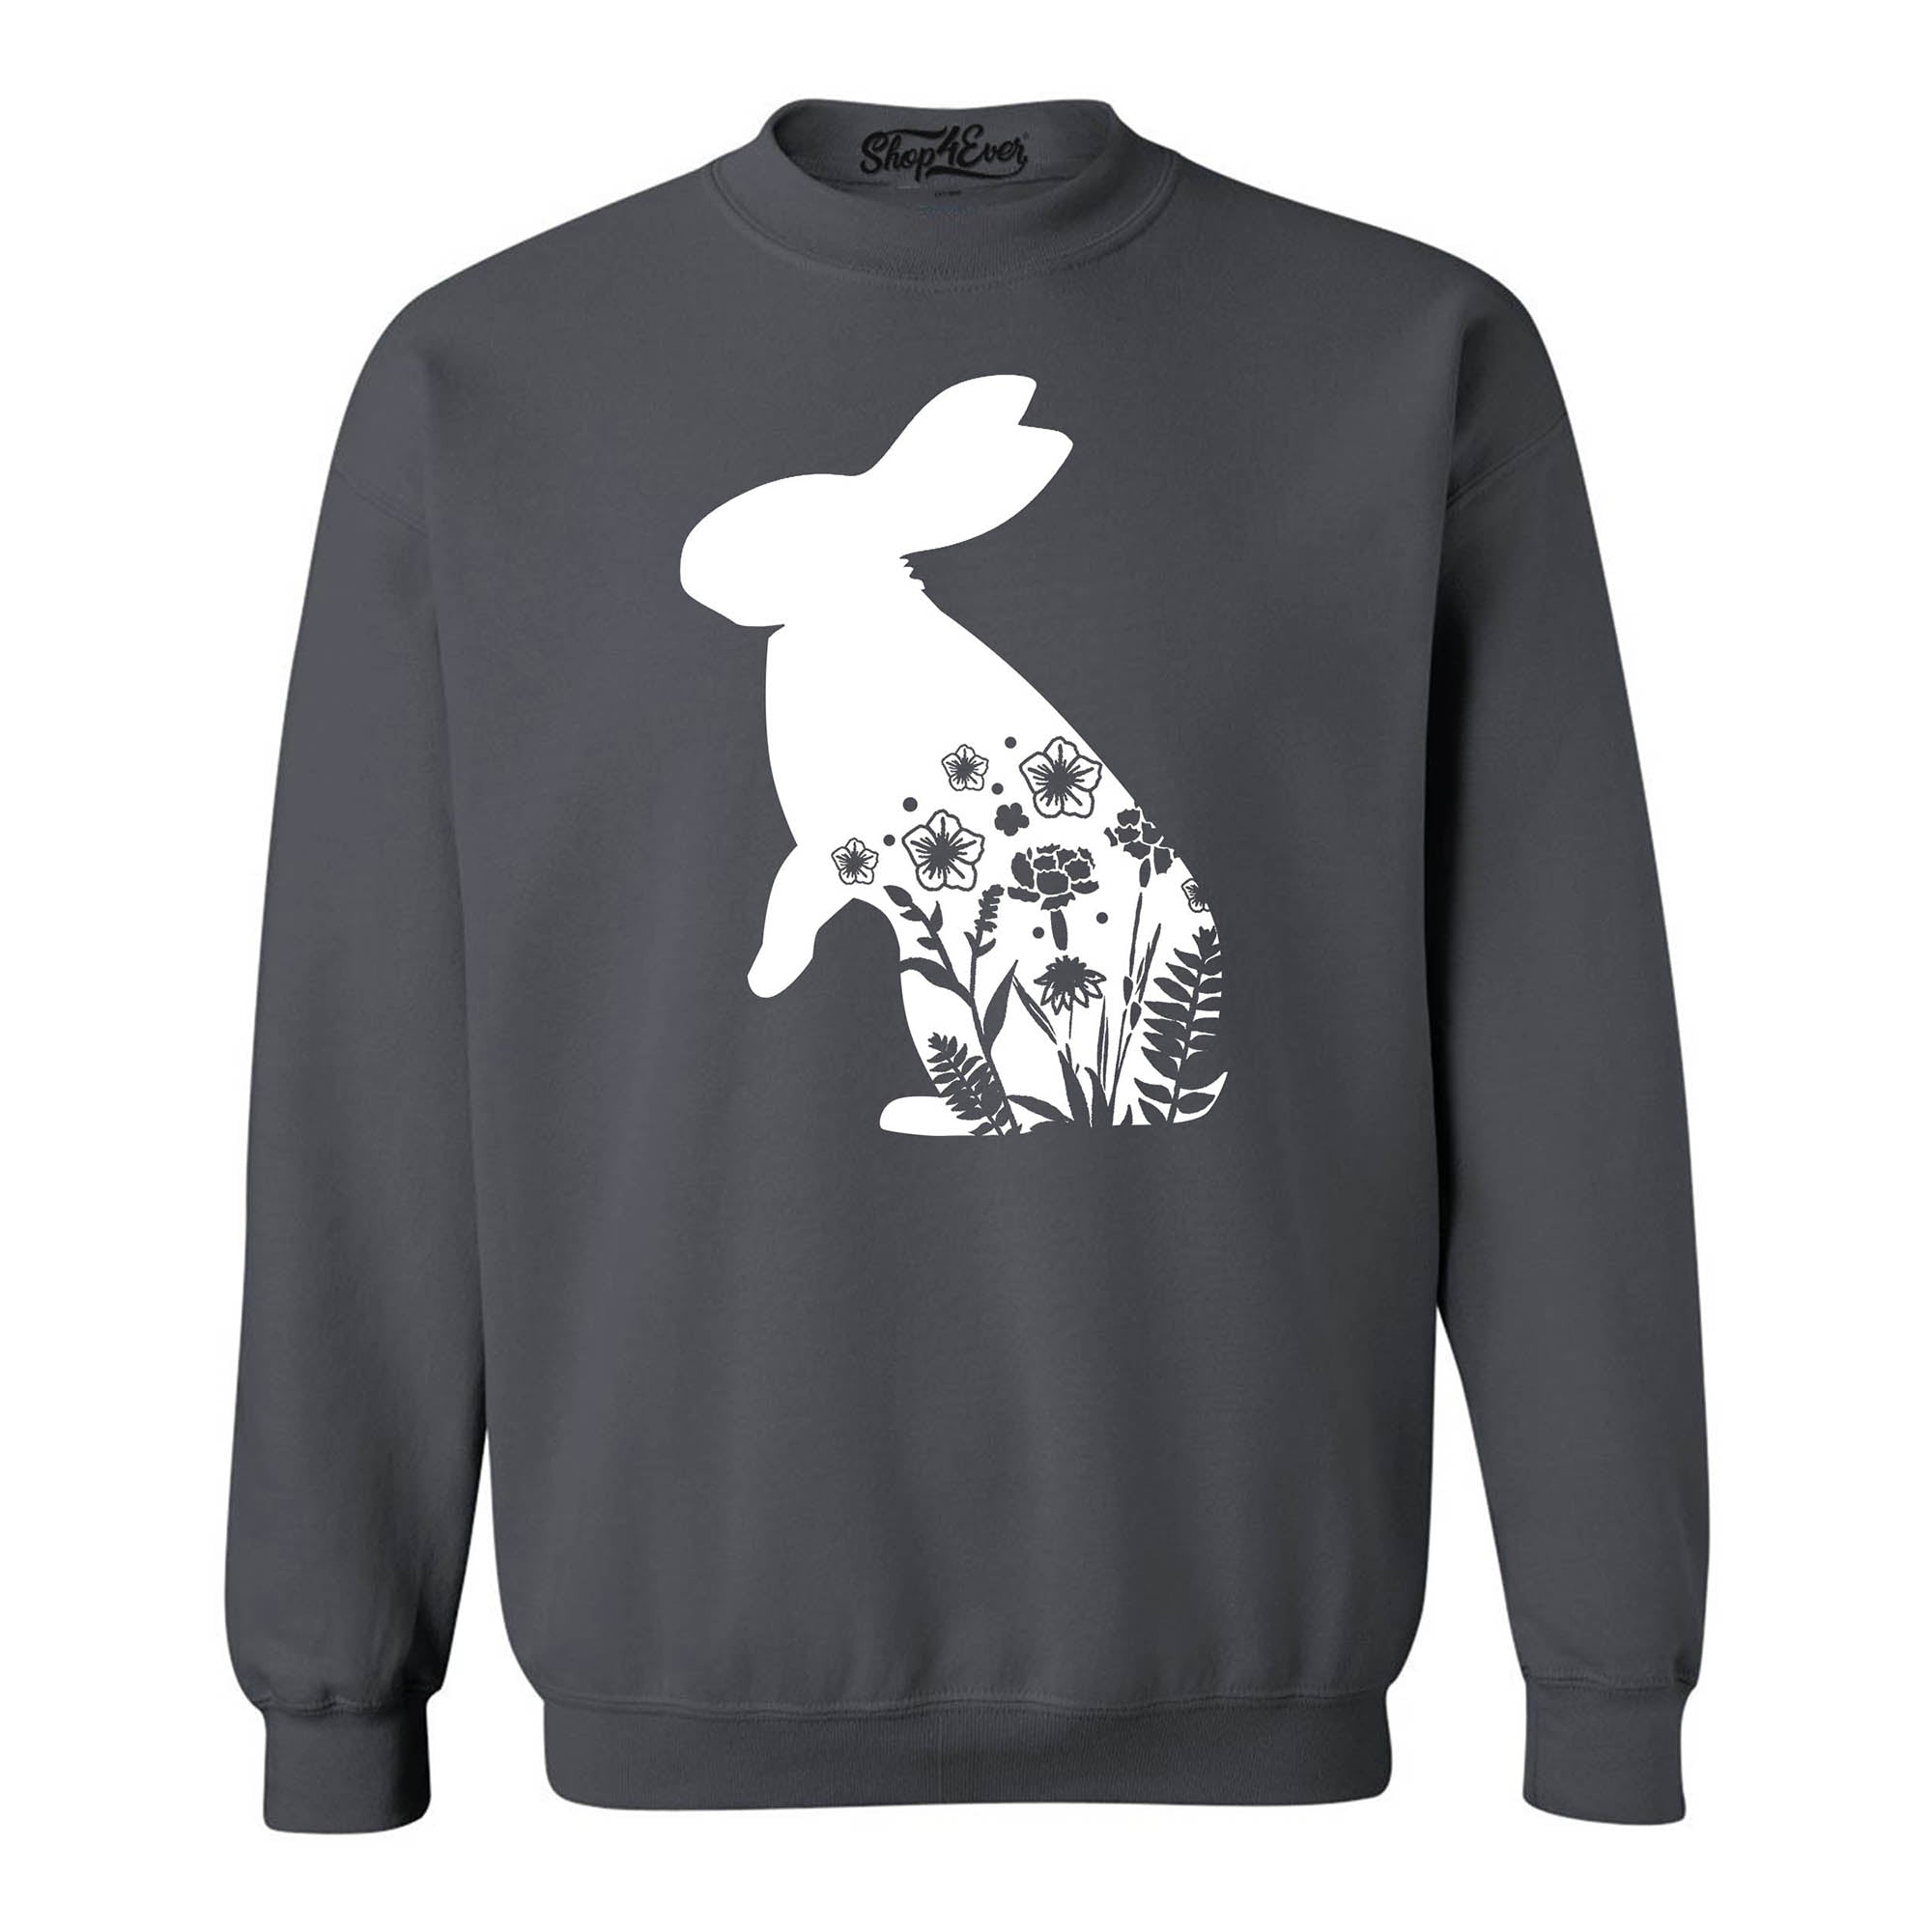 Floral Easter Bunny Rabbit with Spring Flowers Crewneck Sweatshirts